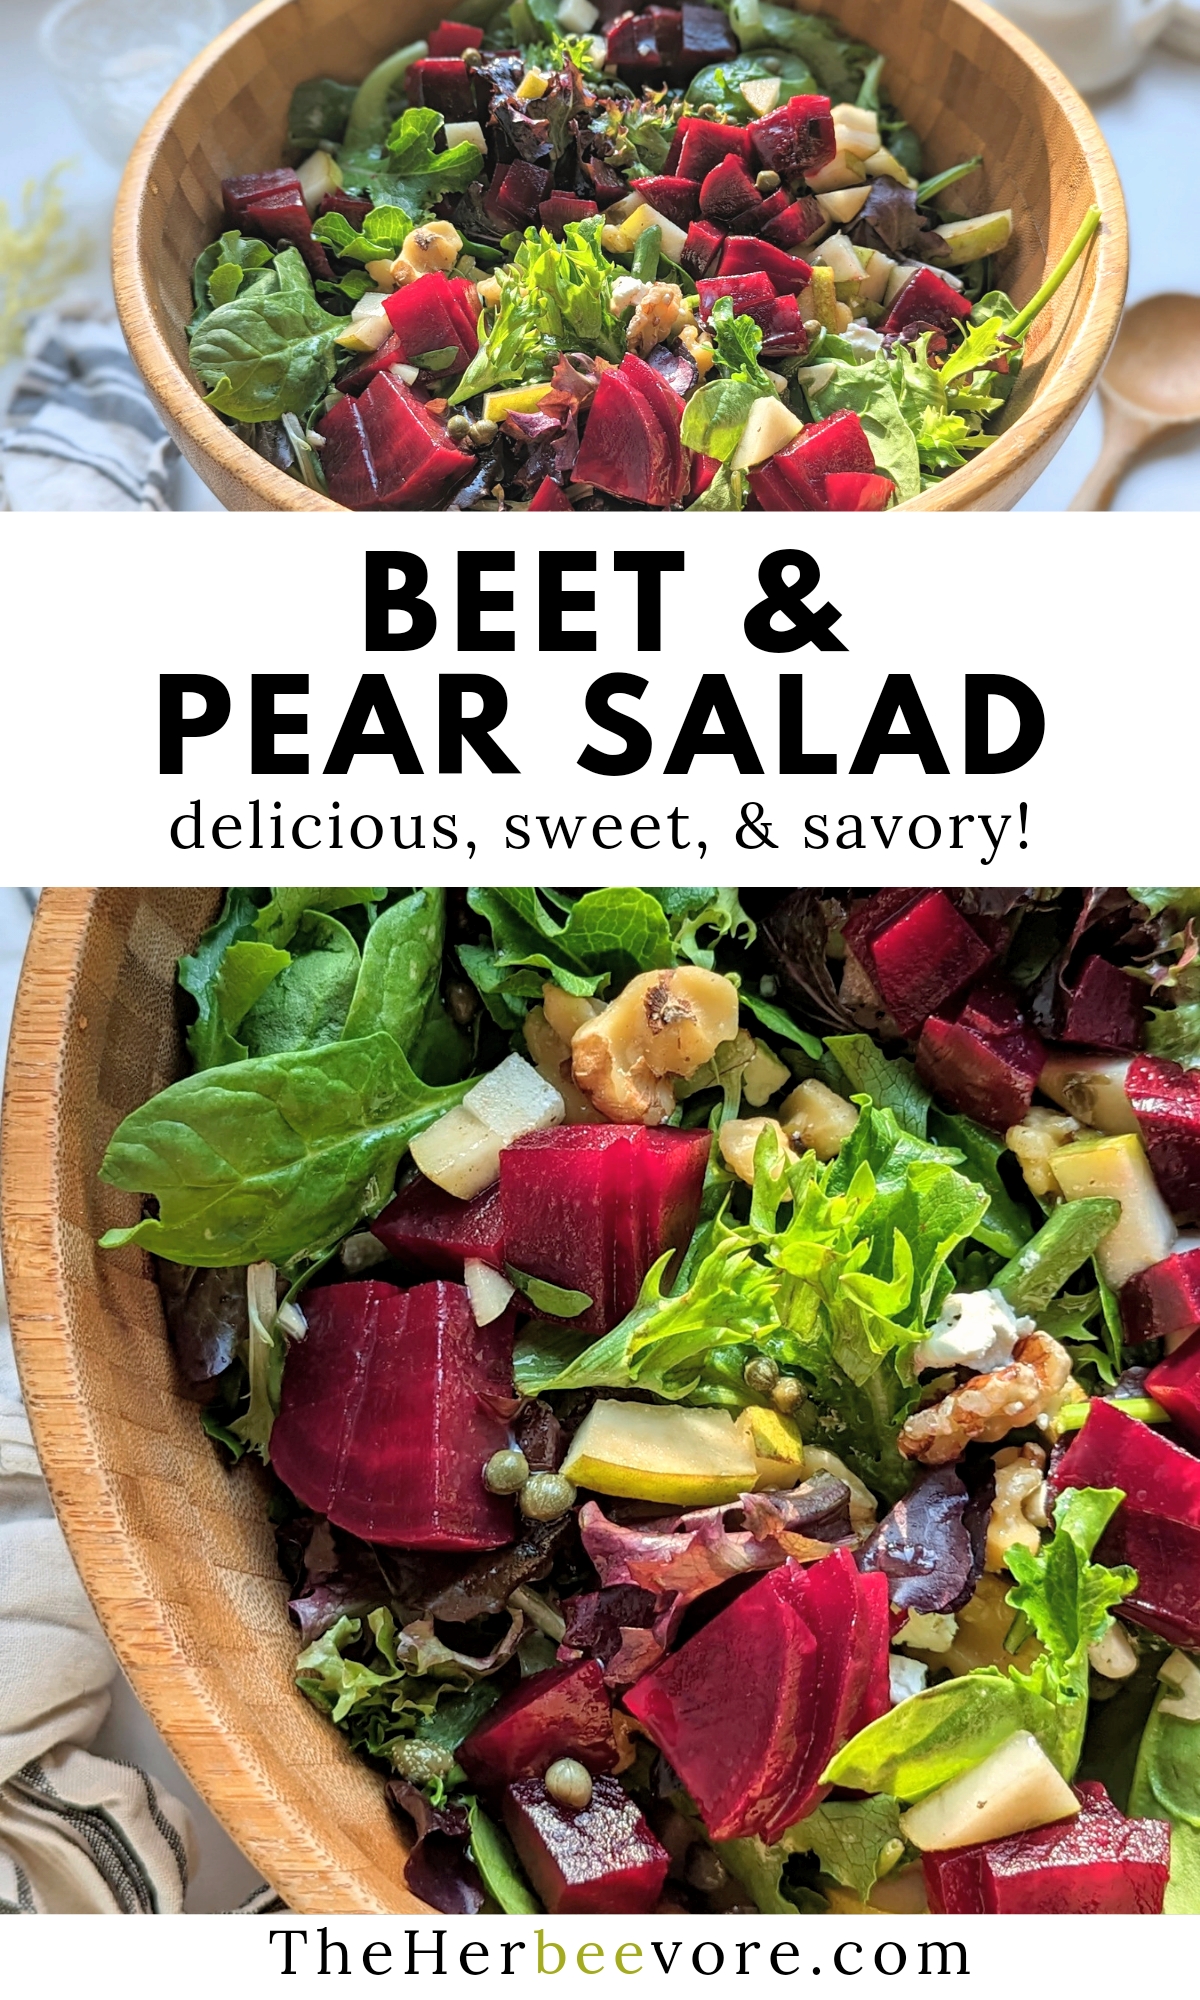 beet and pear salad delicious sweet and savory salad recipes an easy appetizer or side salad with beets and fruit.